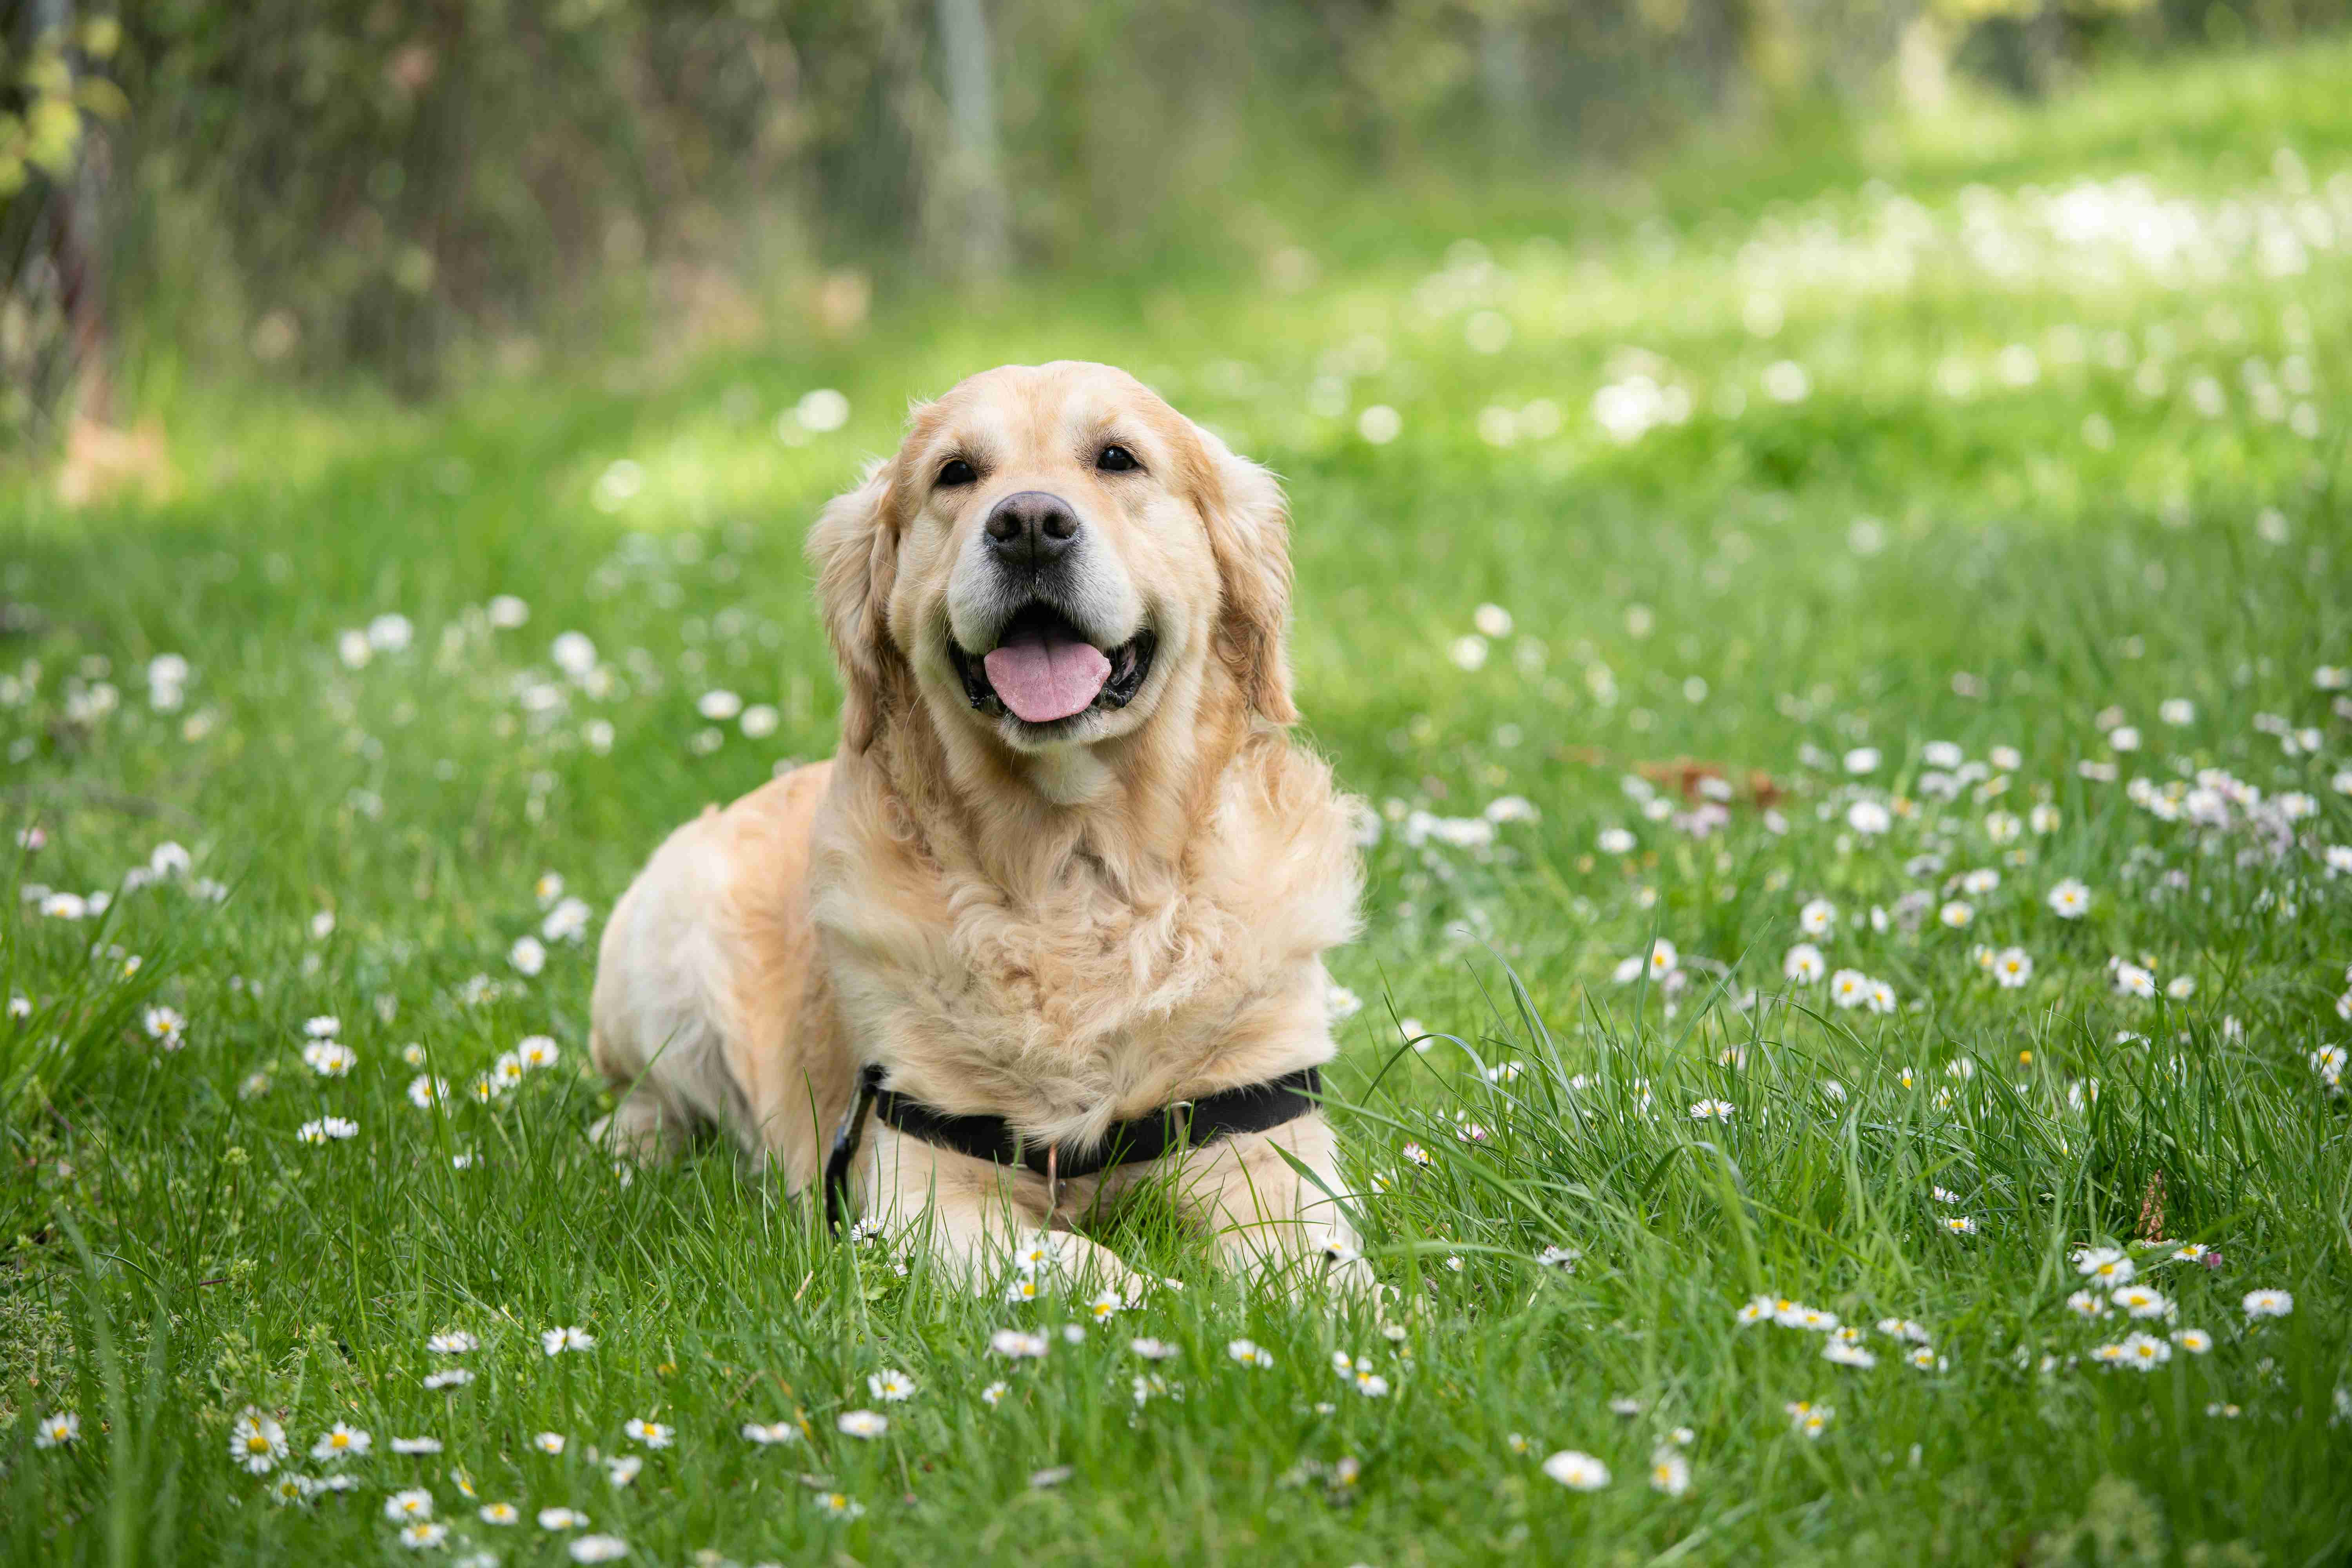 What are some signs of cancer in golden retrievers?